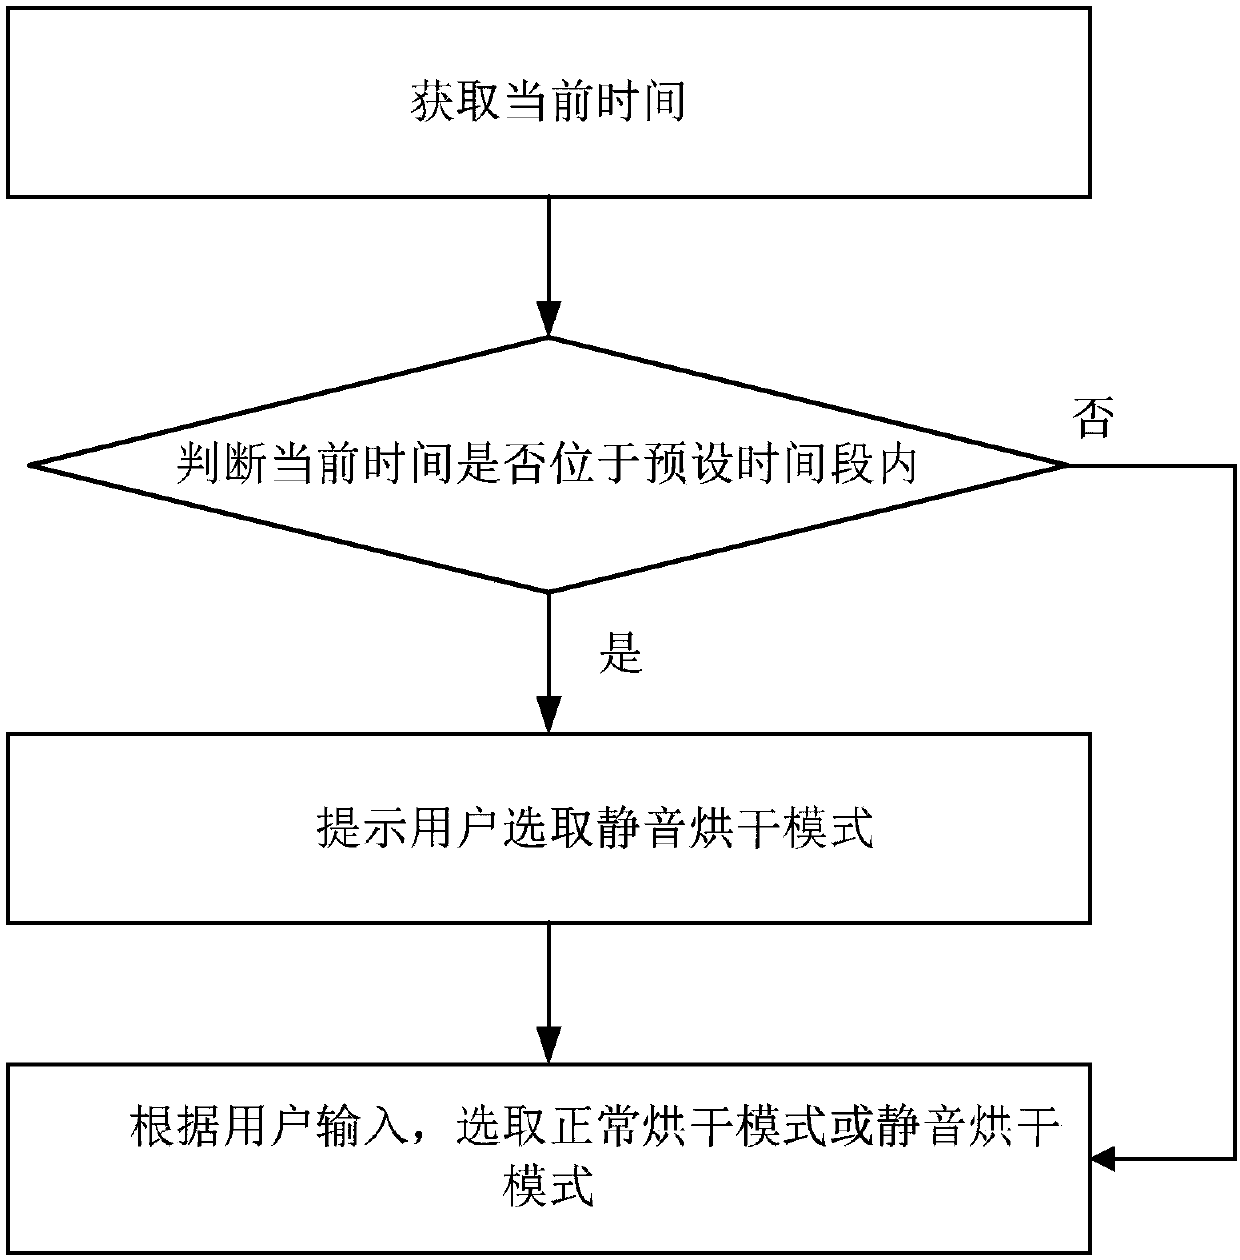 Control method of clothes drying equipment and clothes drying equipment